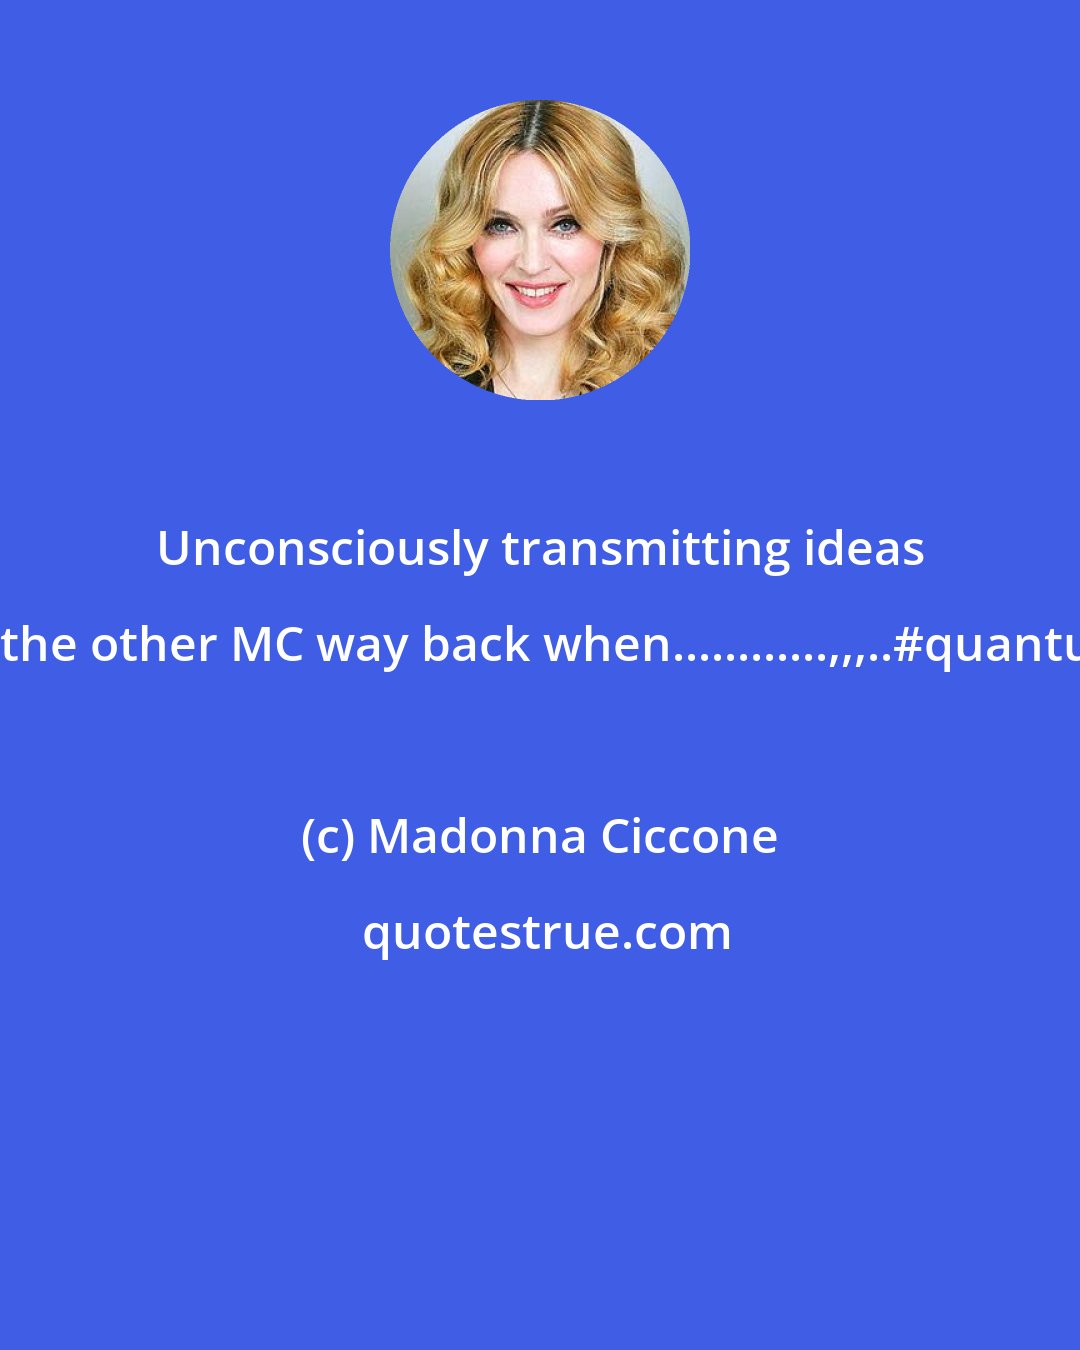 Madonna Ciccone: Unconsciously transmitting ideas to the other MC way back when............,,,..#quantum